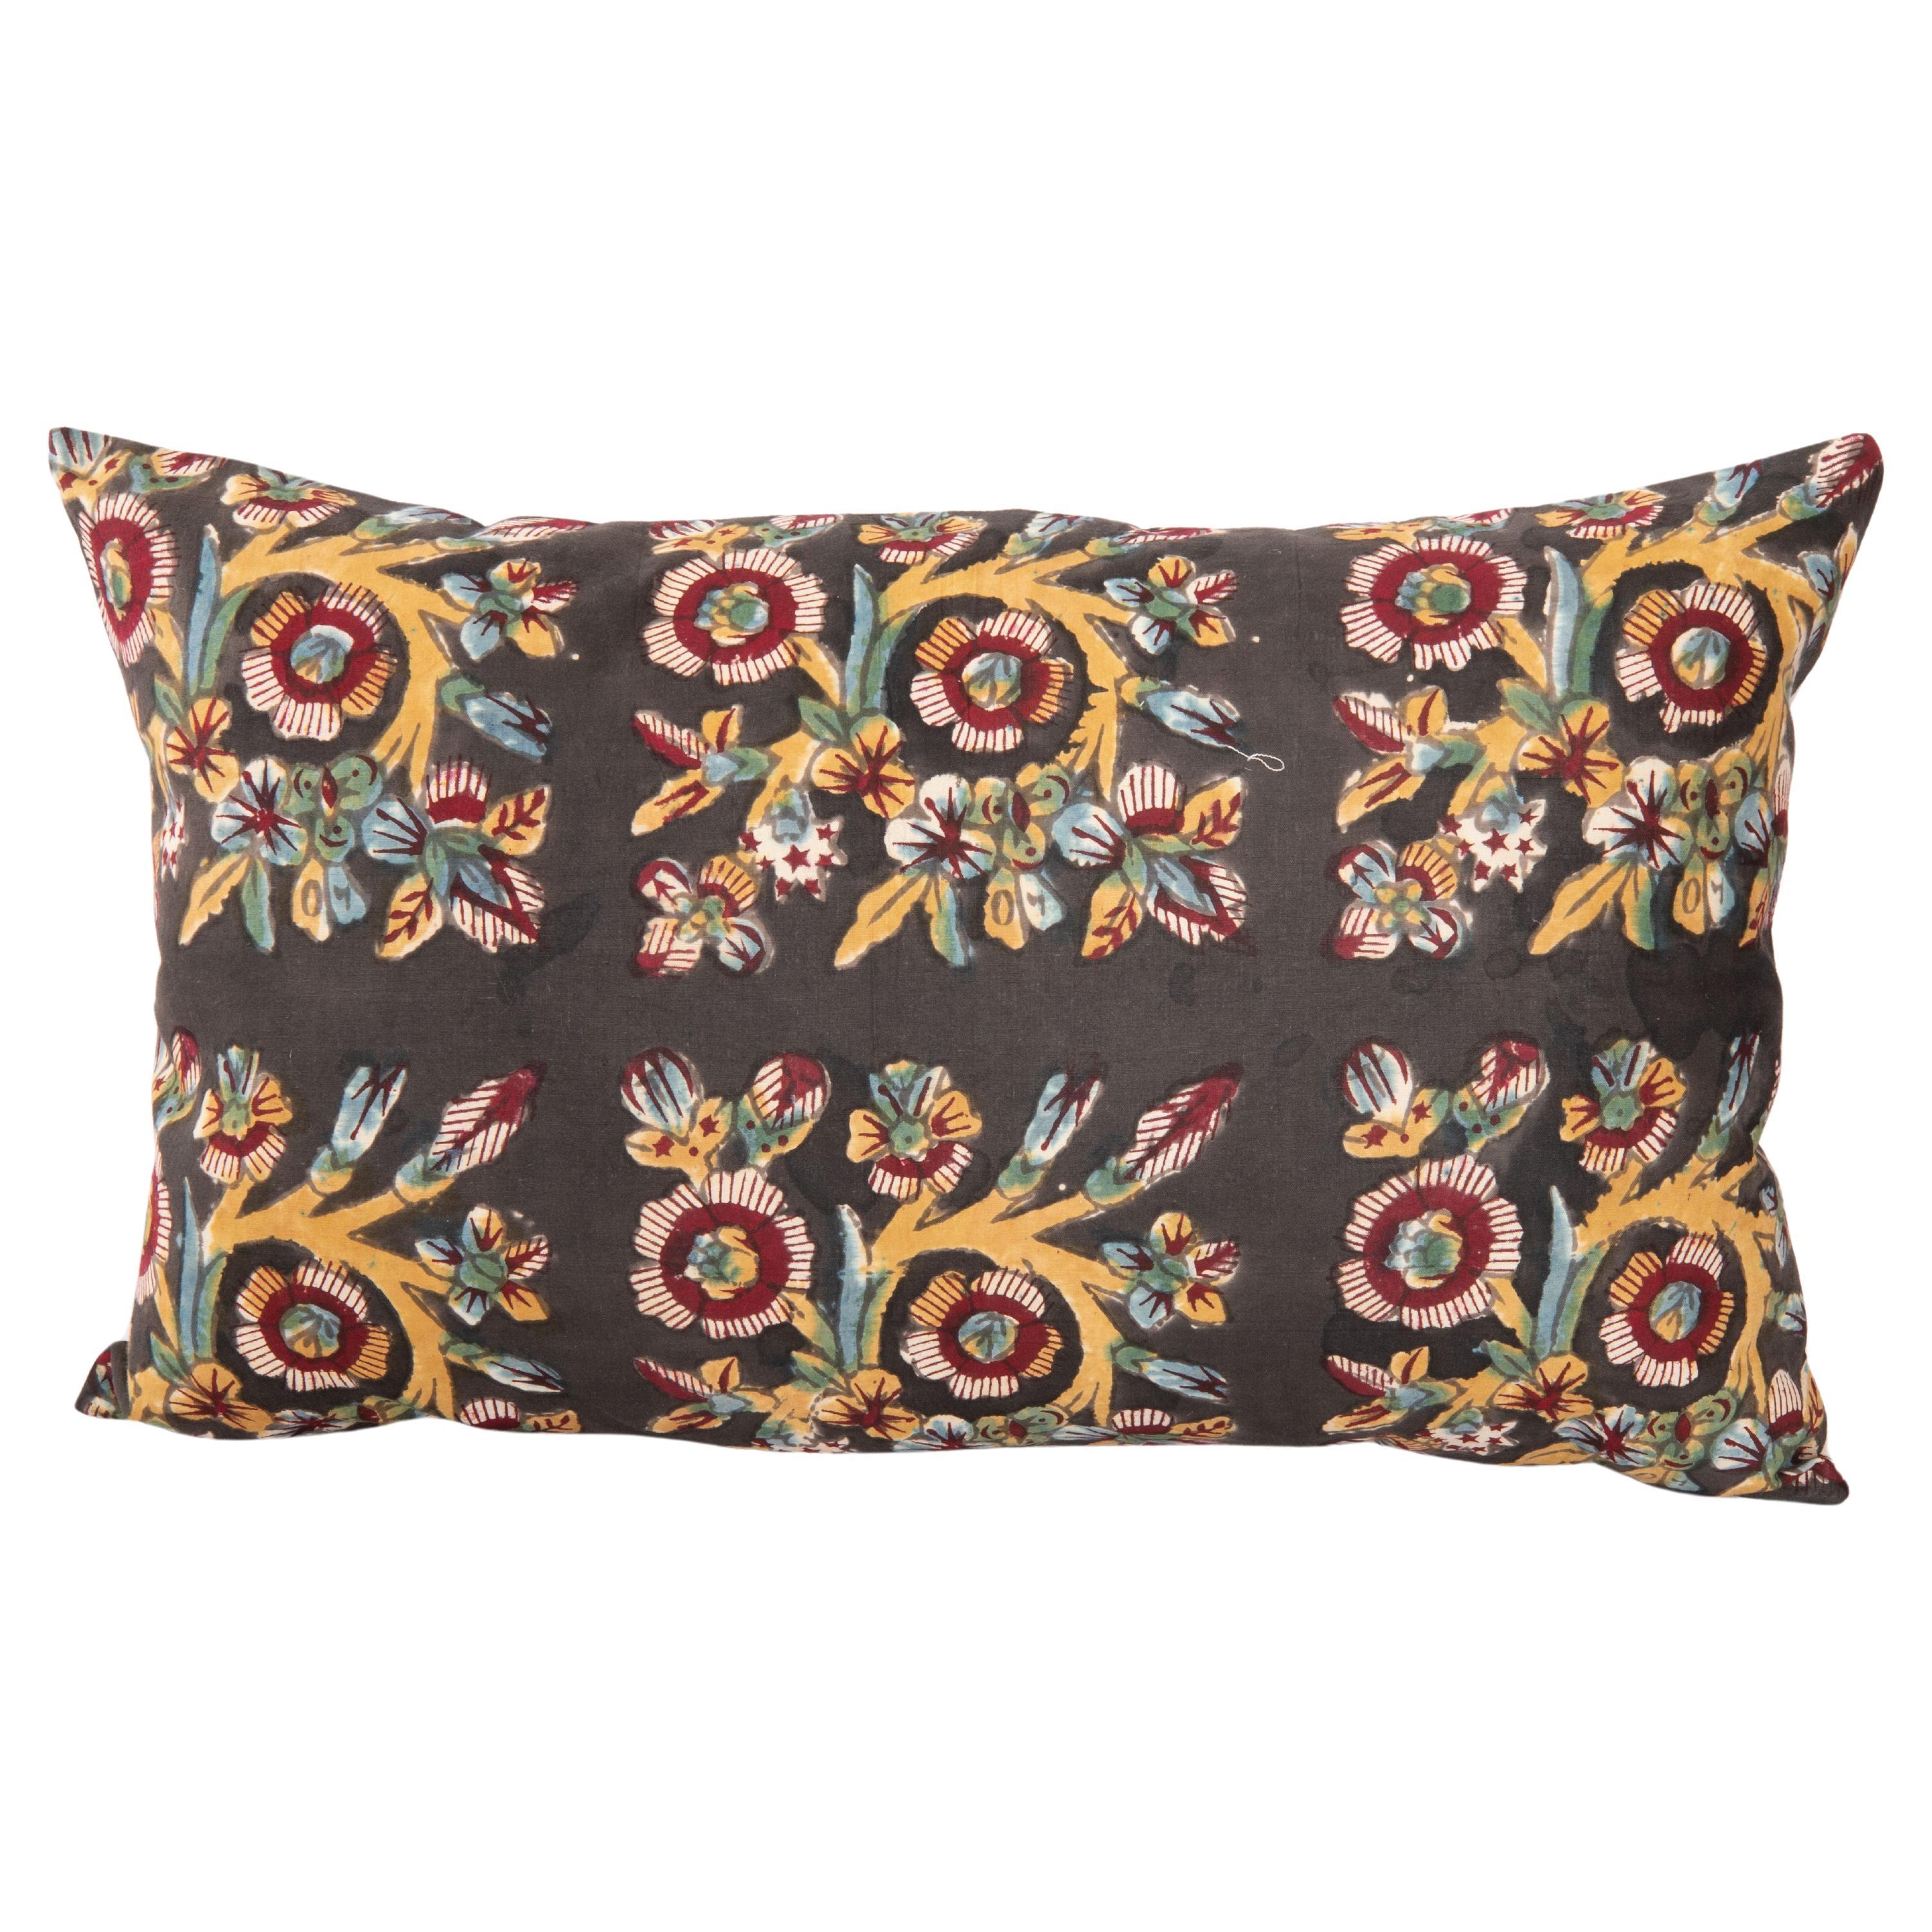 Pillow Cover Made from a Vintage Turkish Block Printed Panel